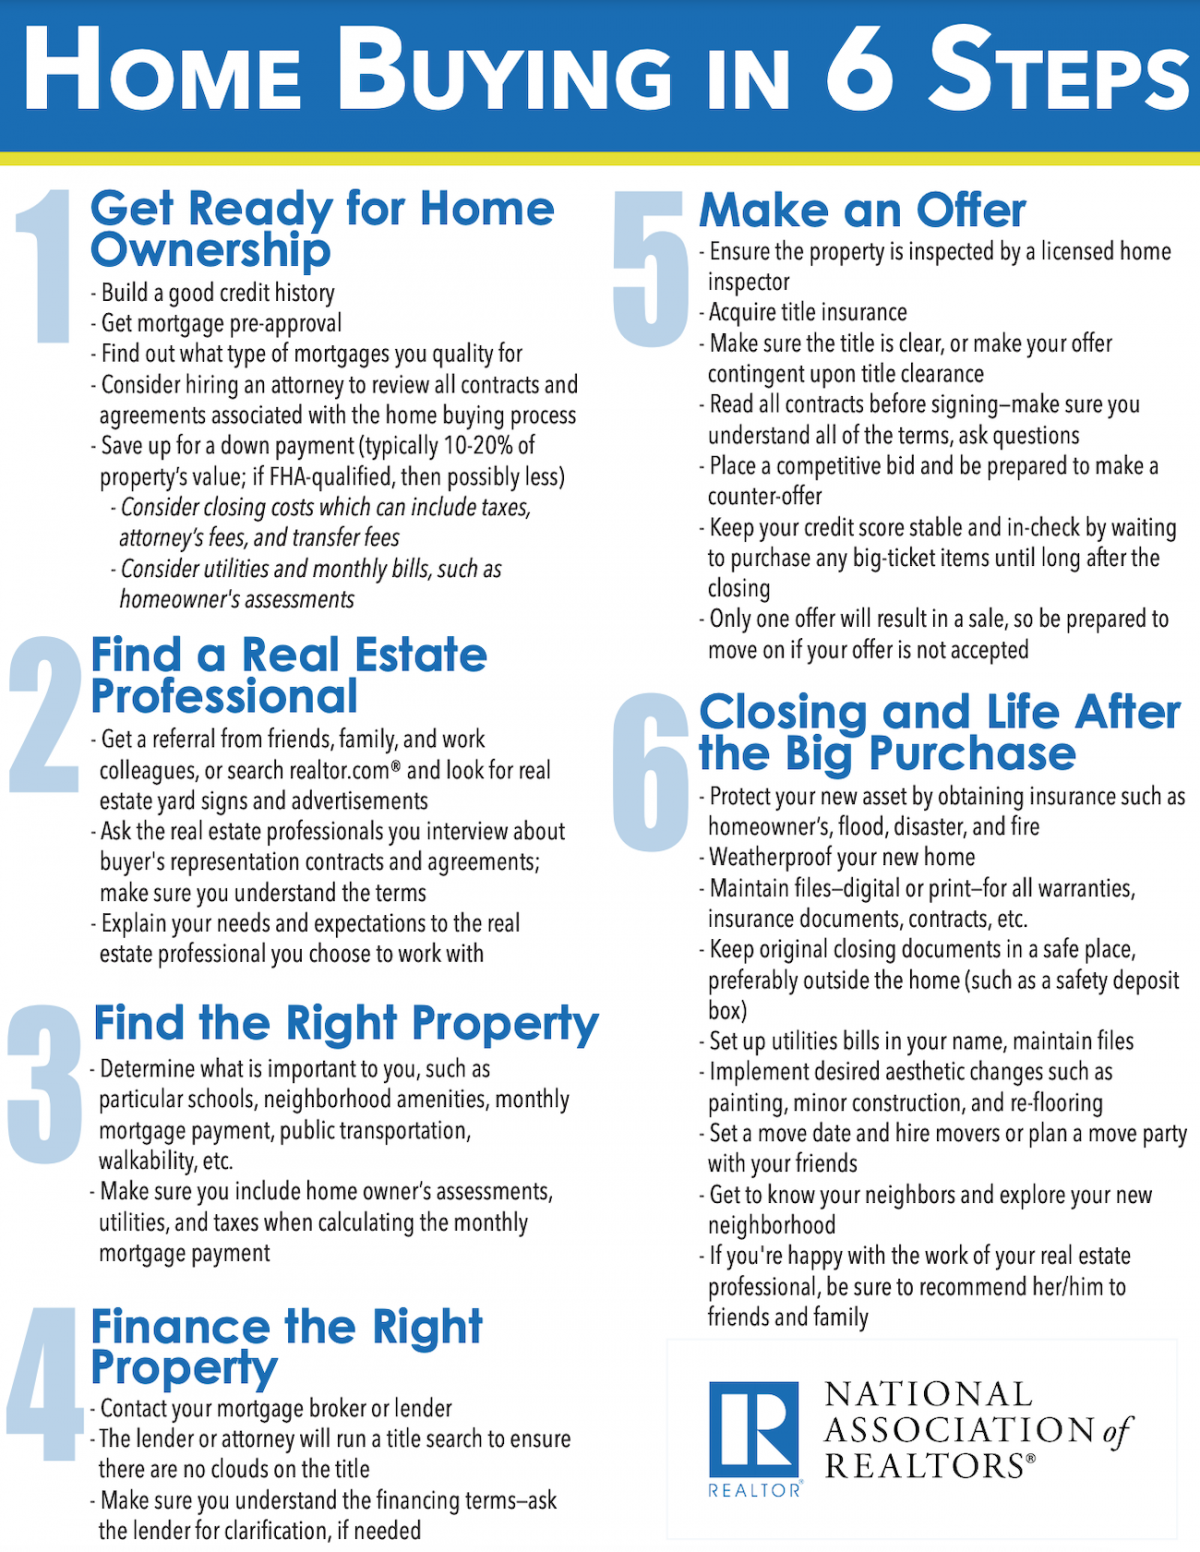 https://cdn.nar.realtor/sites/default/files/styles/inline_paragraph_image/public/home-buying-in-6-steps.png?itok=ODIA0HZz